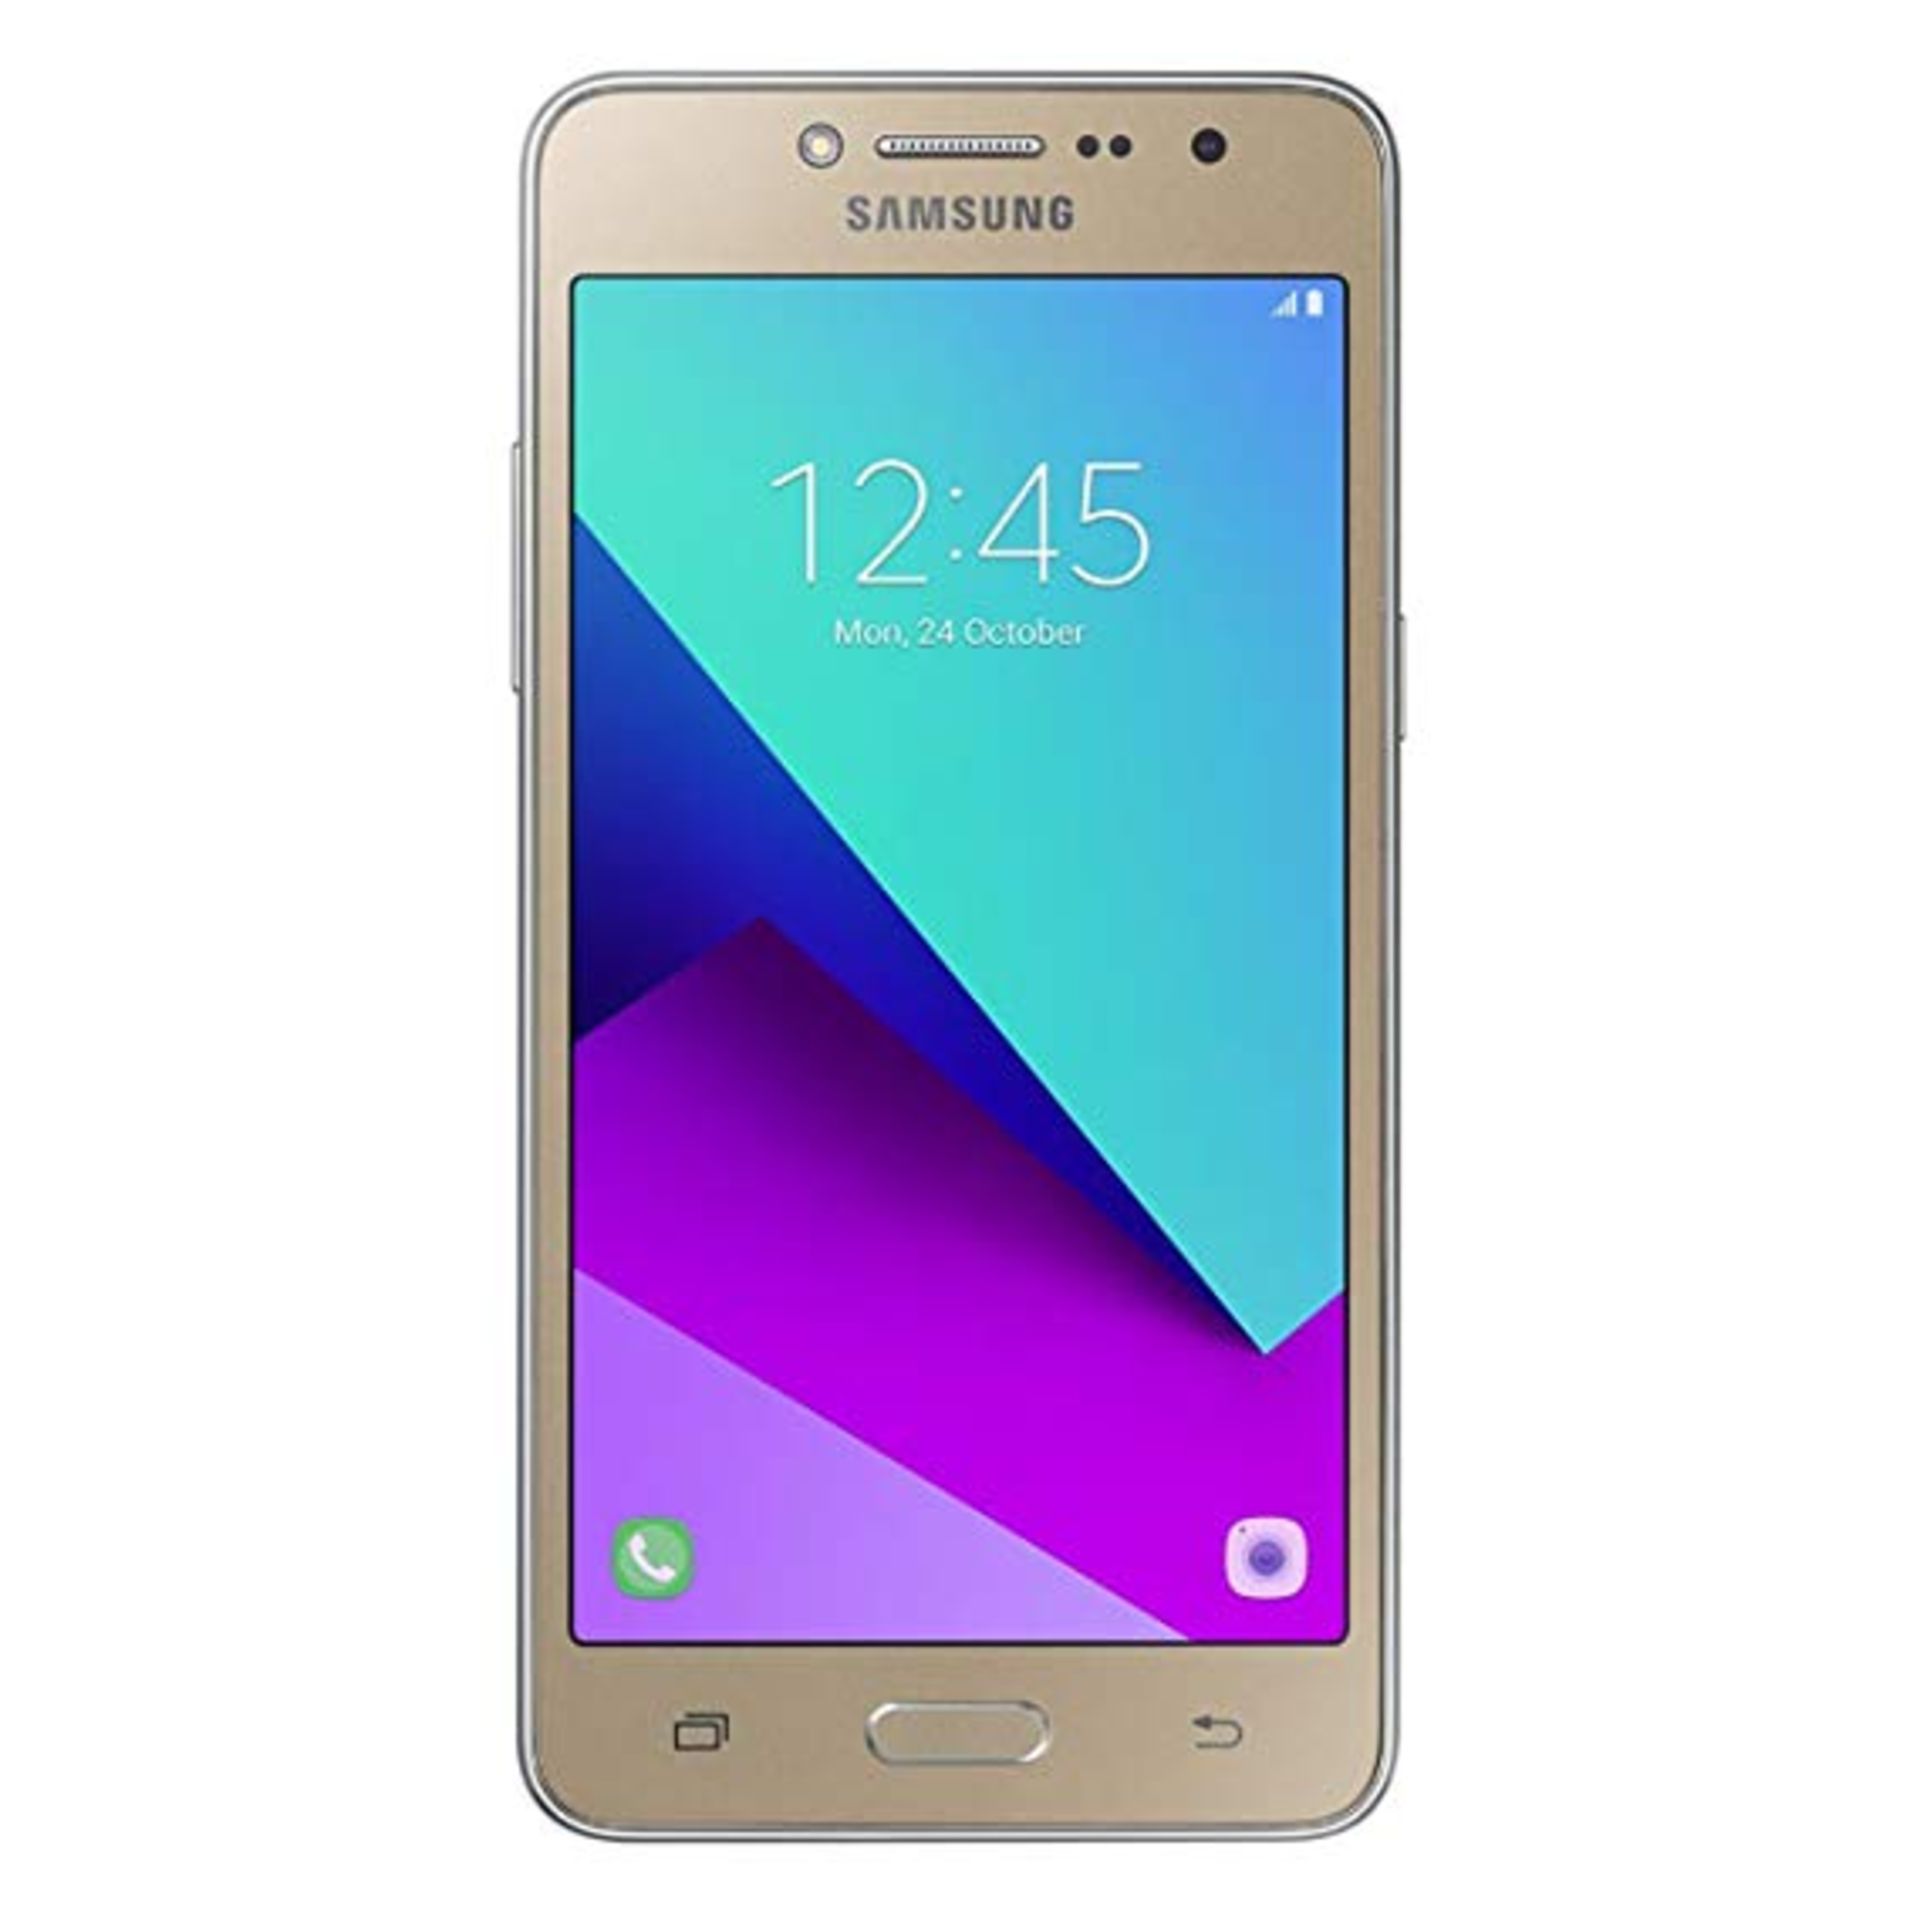 Grade A Samsung J2 prime (G532) Colours May Vary Item available approx 12 working days after sale